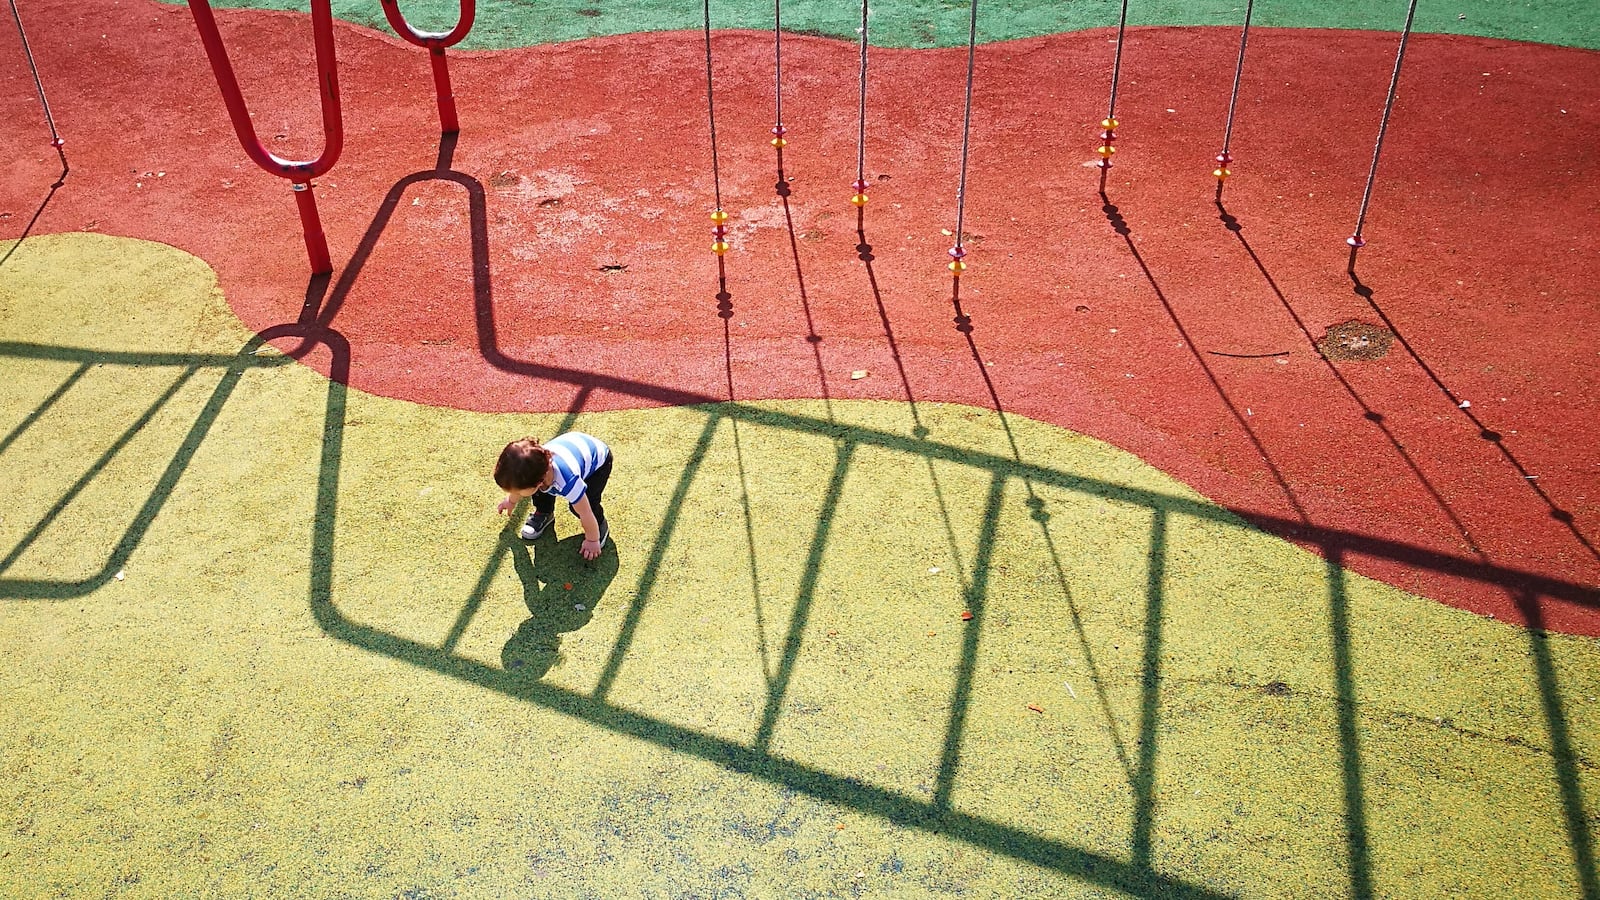 A small boy leans down to touch his shadow on a red and yellow playground surface.